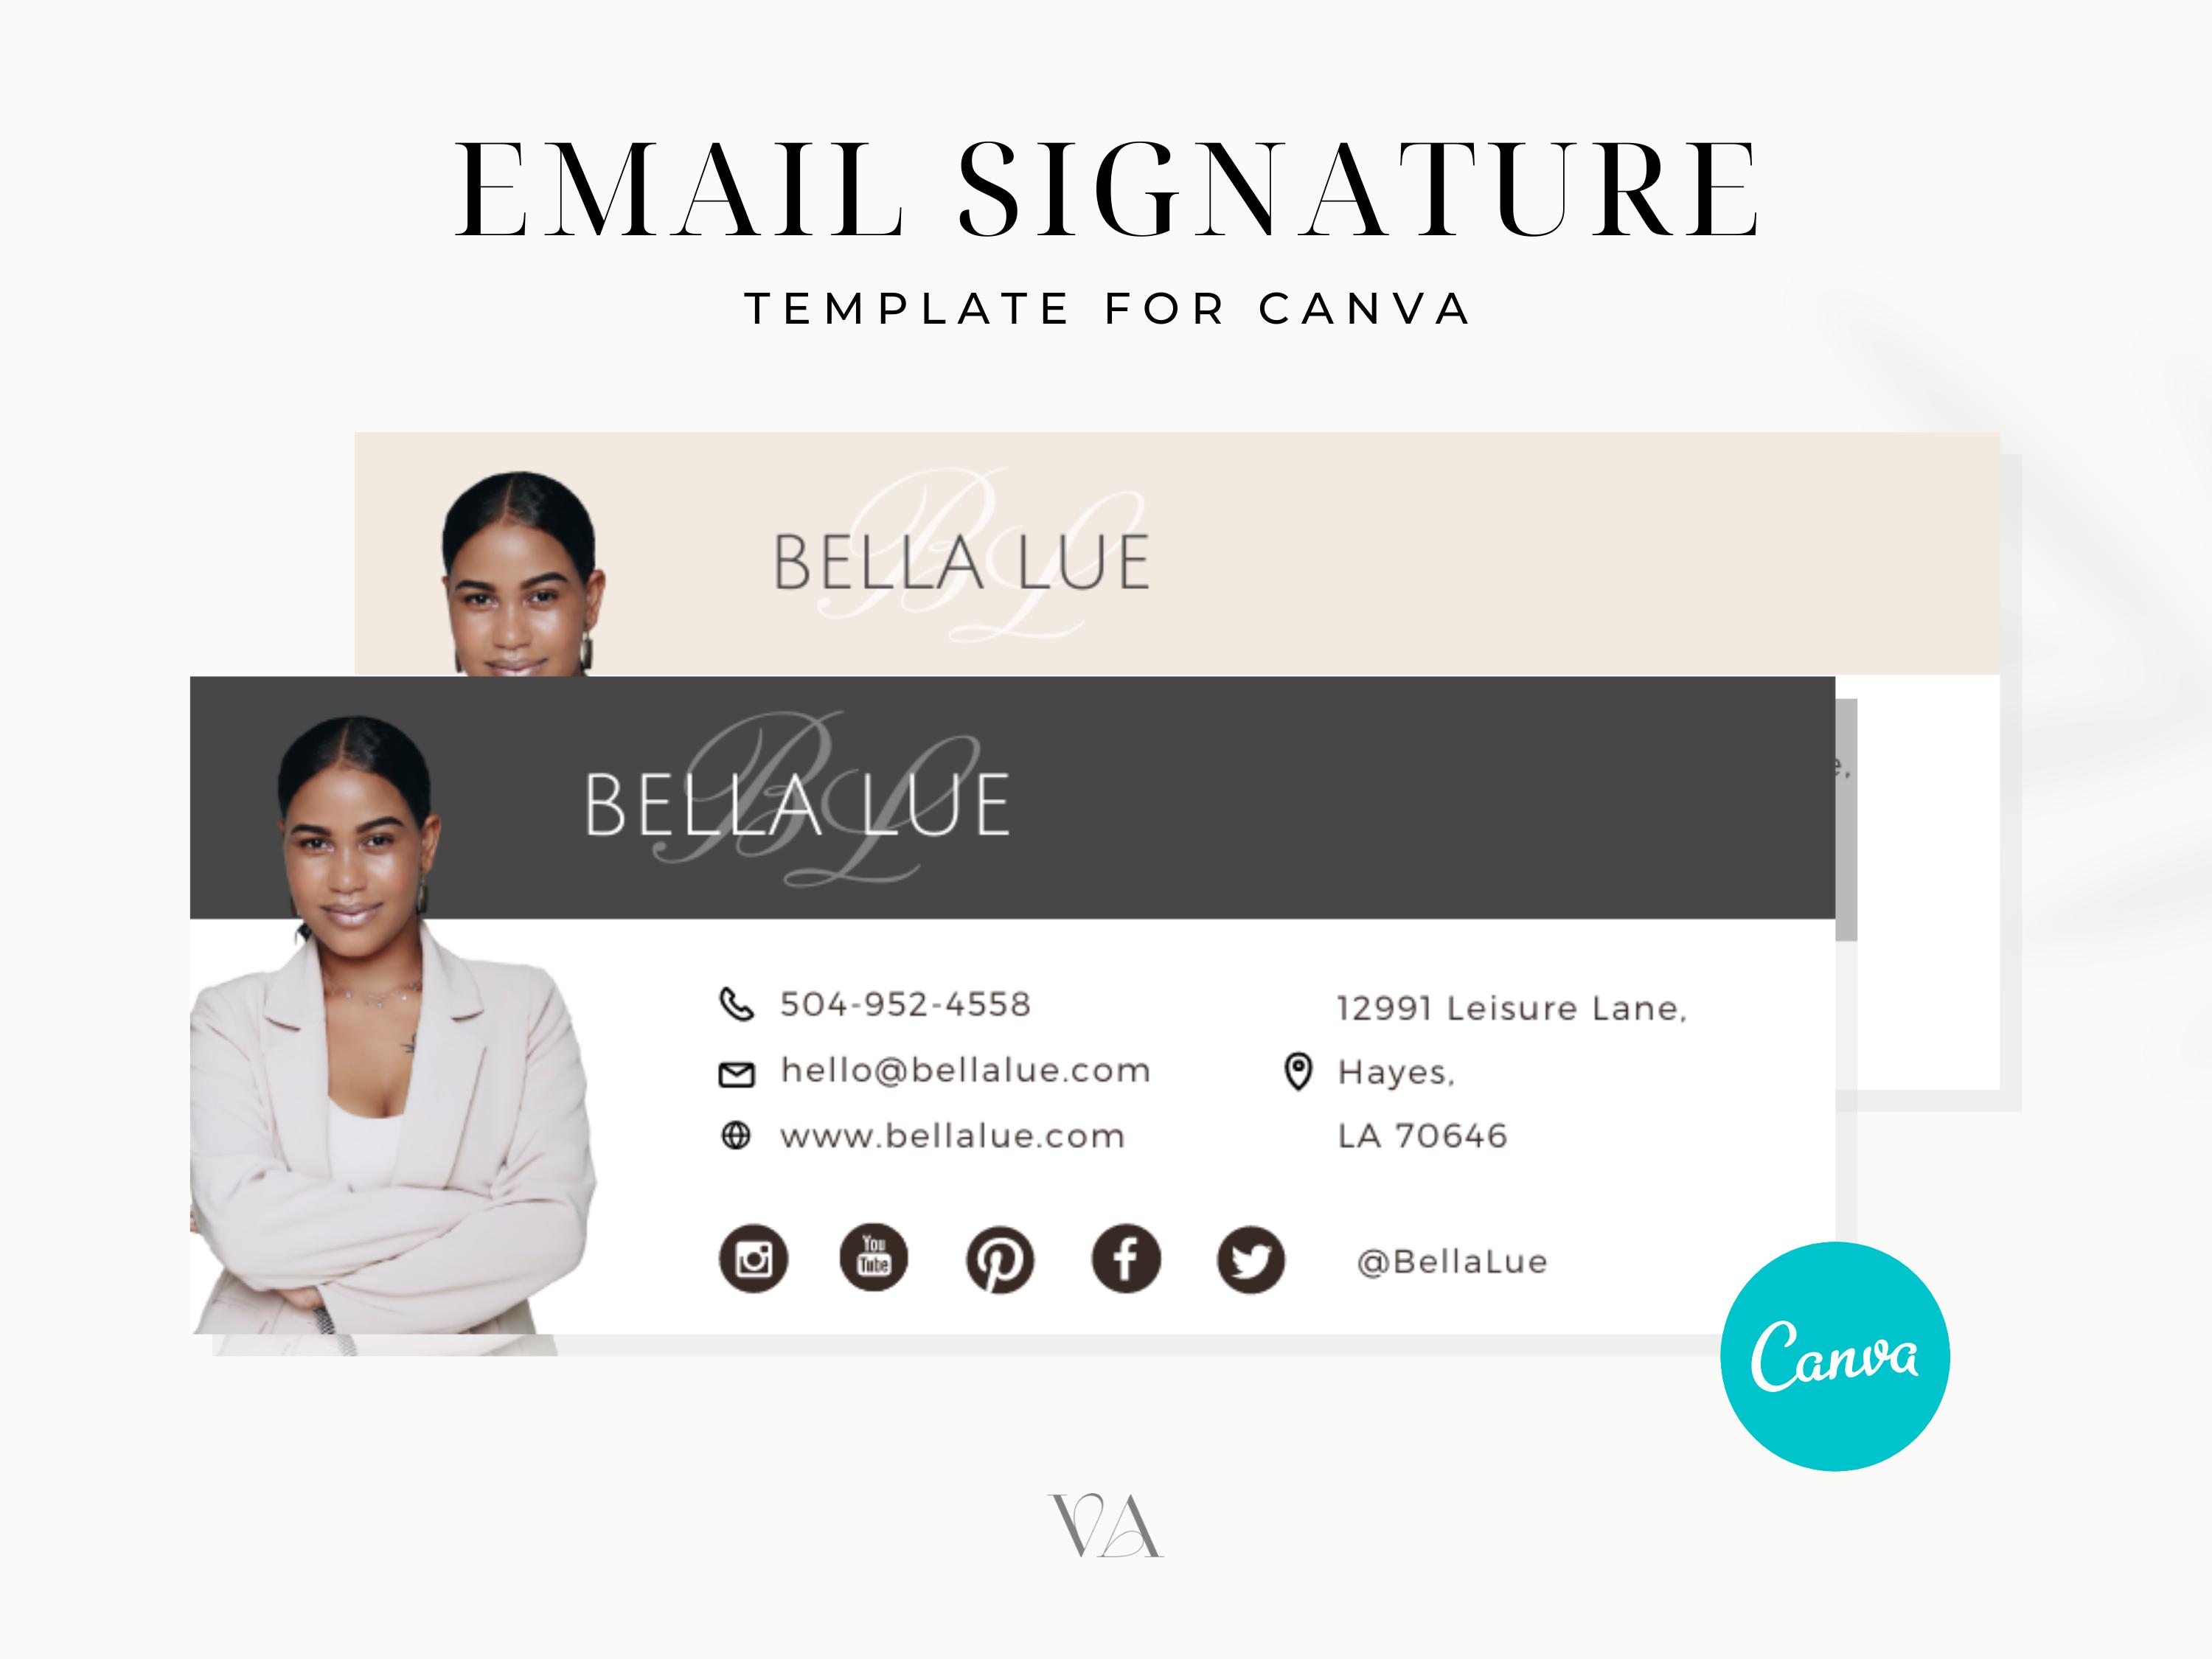 Email Signature Template for Canva